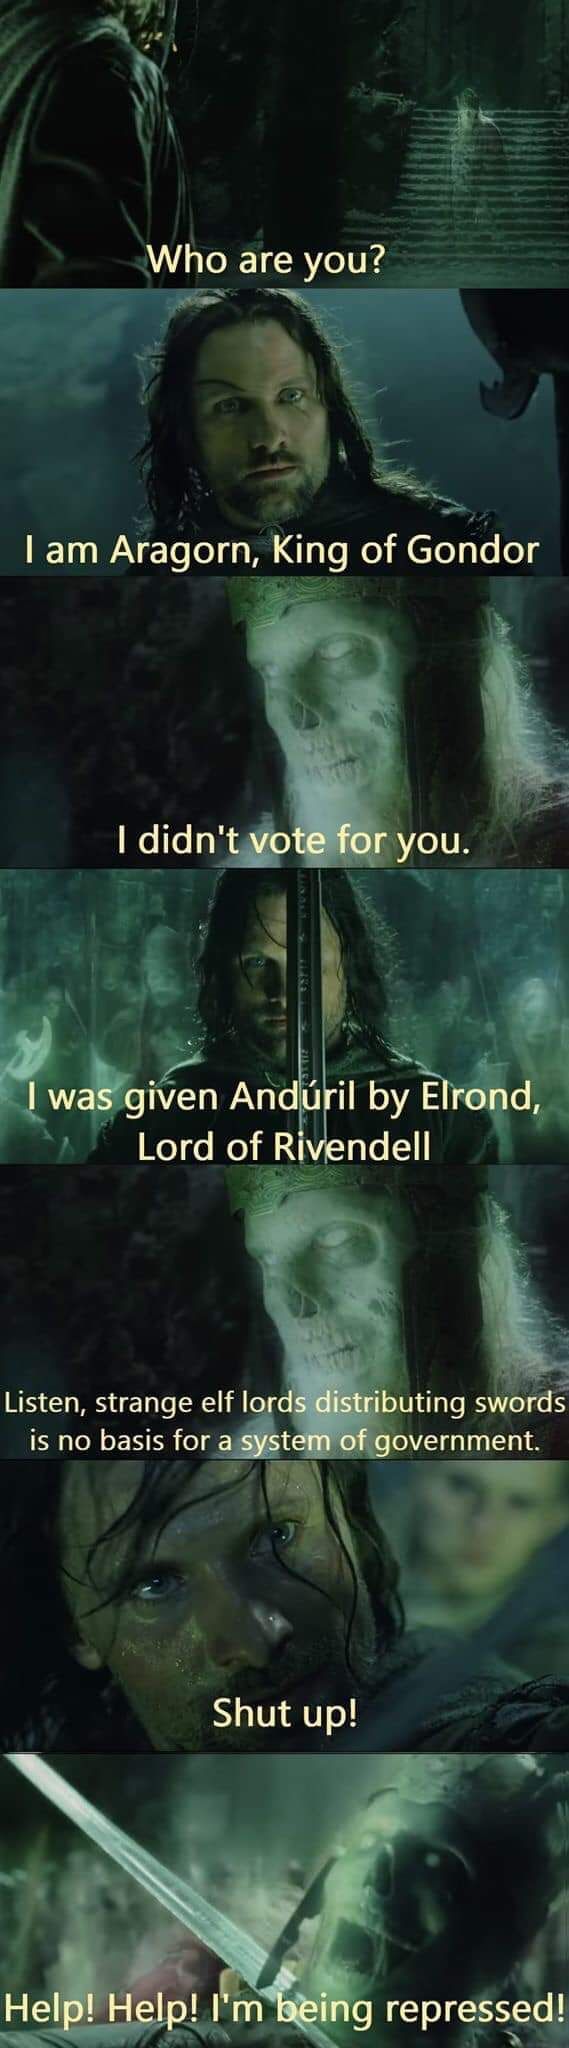 Who are you?
I am Aragorn, King of Gondor
I didn't vote for you.
I was given Andúril by Elrond,
Lord of Rivendell
Listen, strange elf lords distributing swords
is no basis for a system of government.
Shut up!
Help! Help! I'm being repressed!